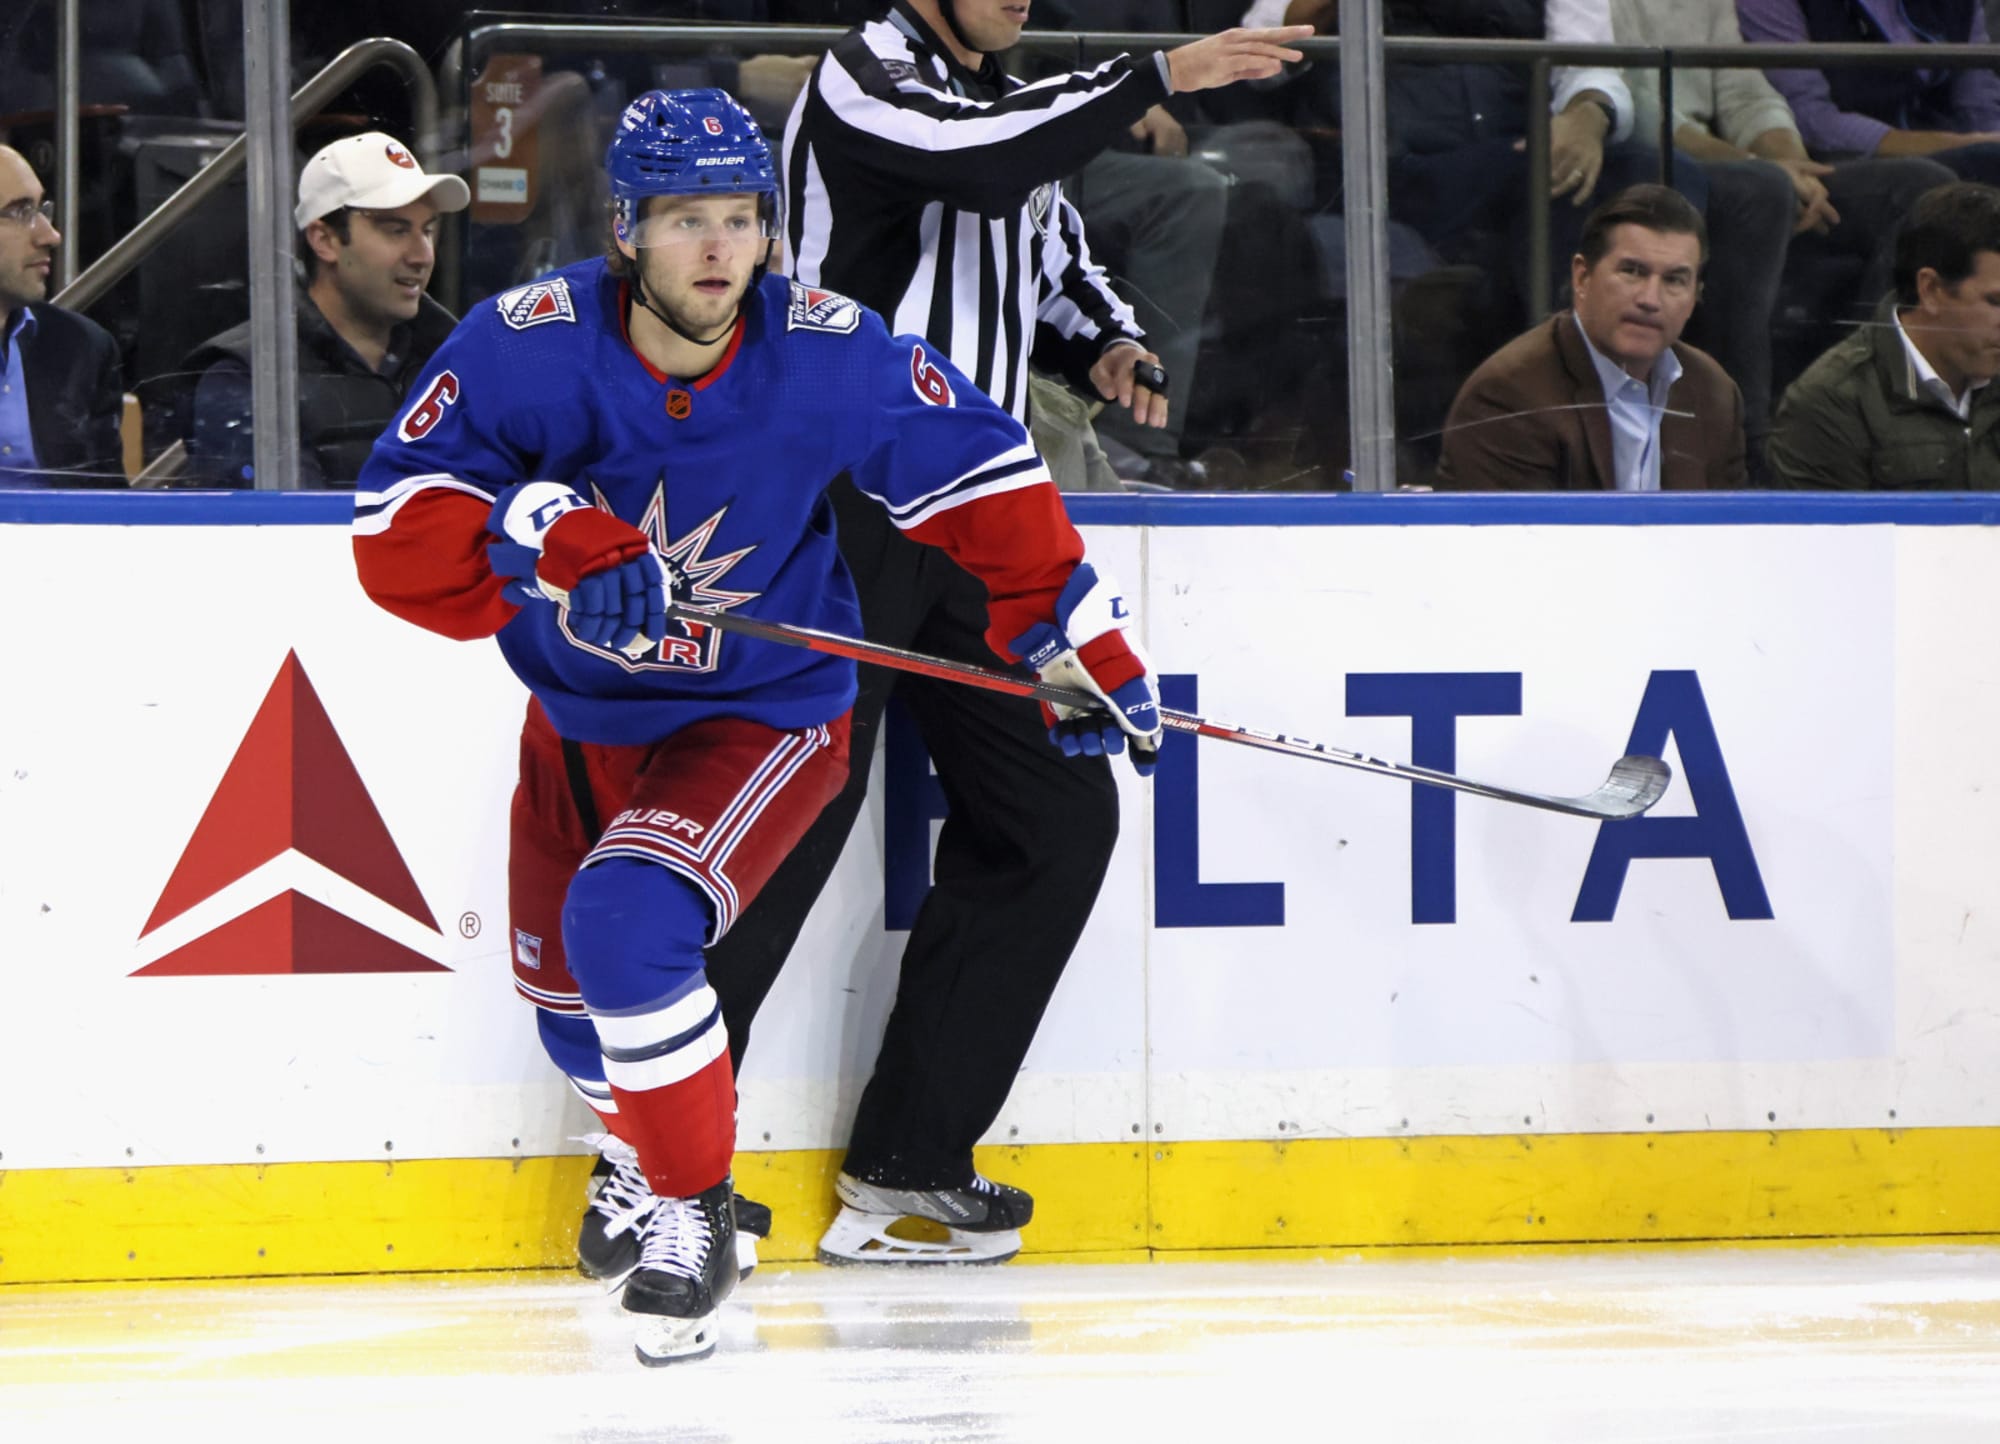 Why Are the New York Rangers Called the Rangers?